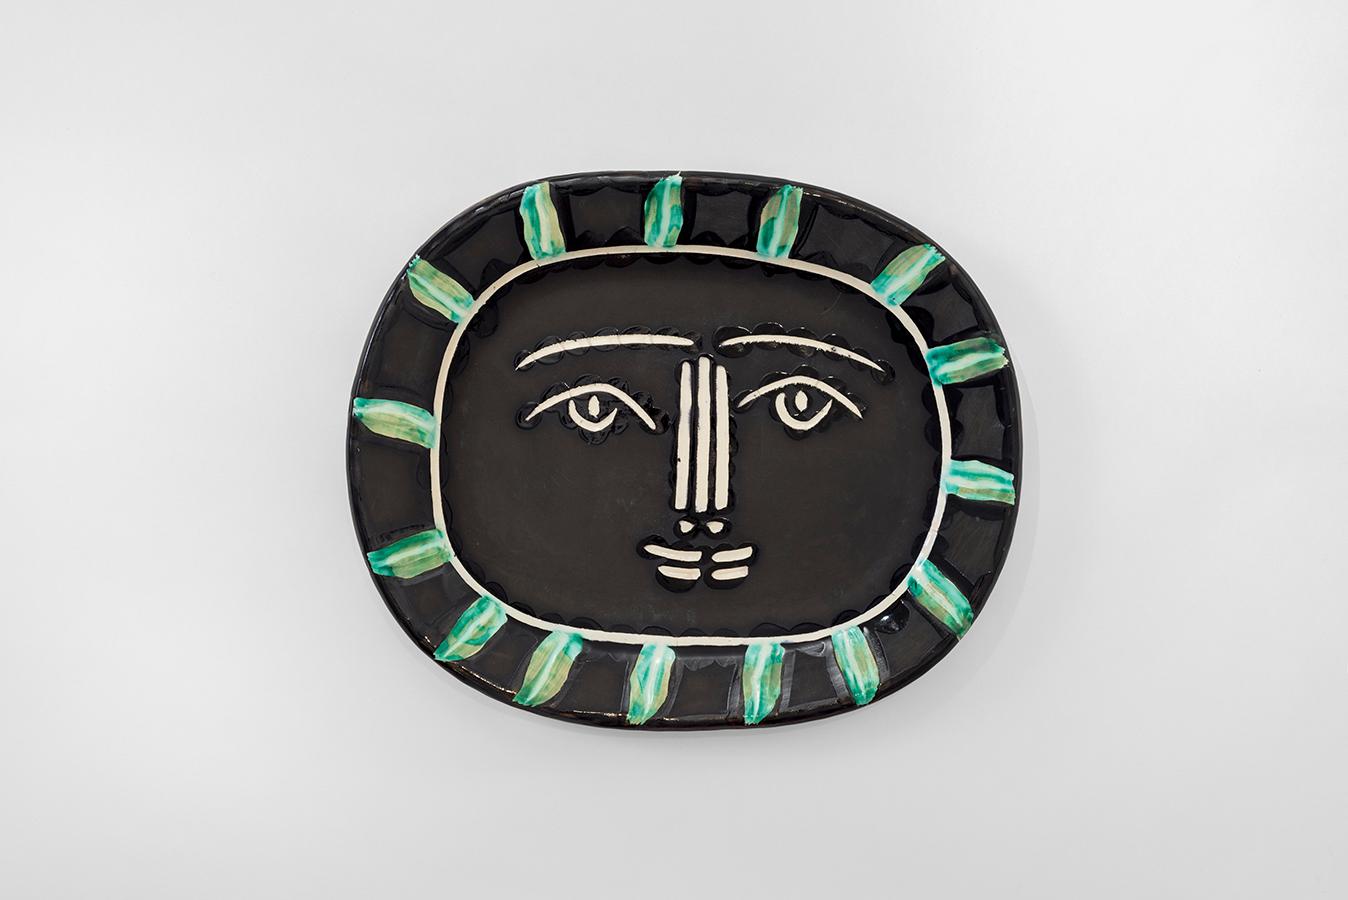 Rectangular dish (A.R. 206)
Inscribed 'Edition Picasso' and 'Madoura' and stamped 'Edition Picasso / Madoura Plein Feu' on reverse
White earthenware clay, decoration in engobes, partially engraved under a brushed glaze
Green, white, black
Length: 14